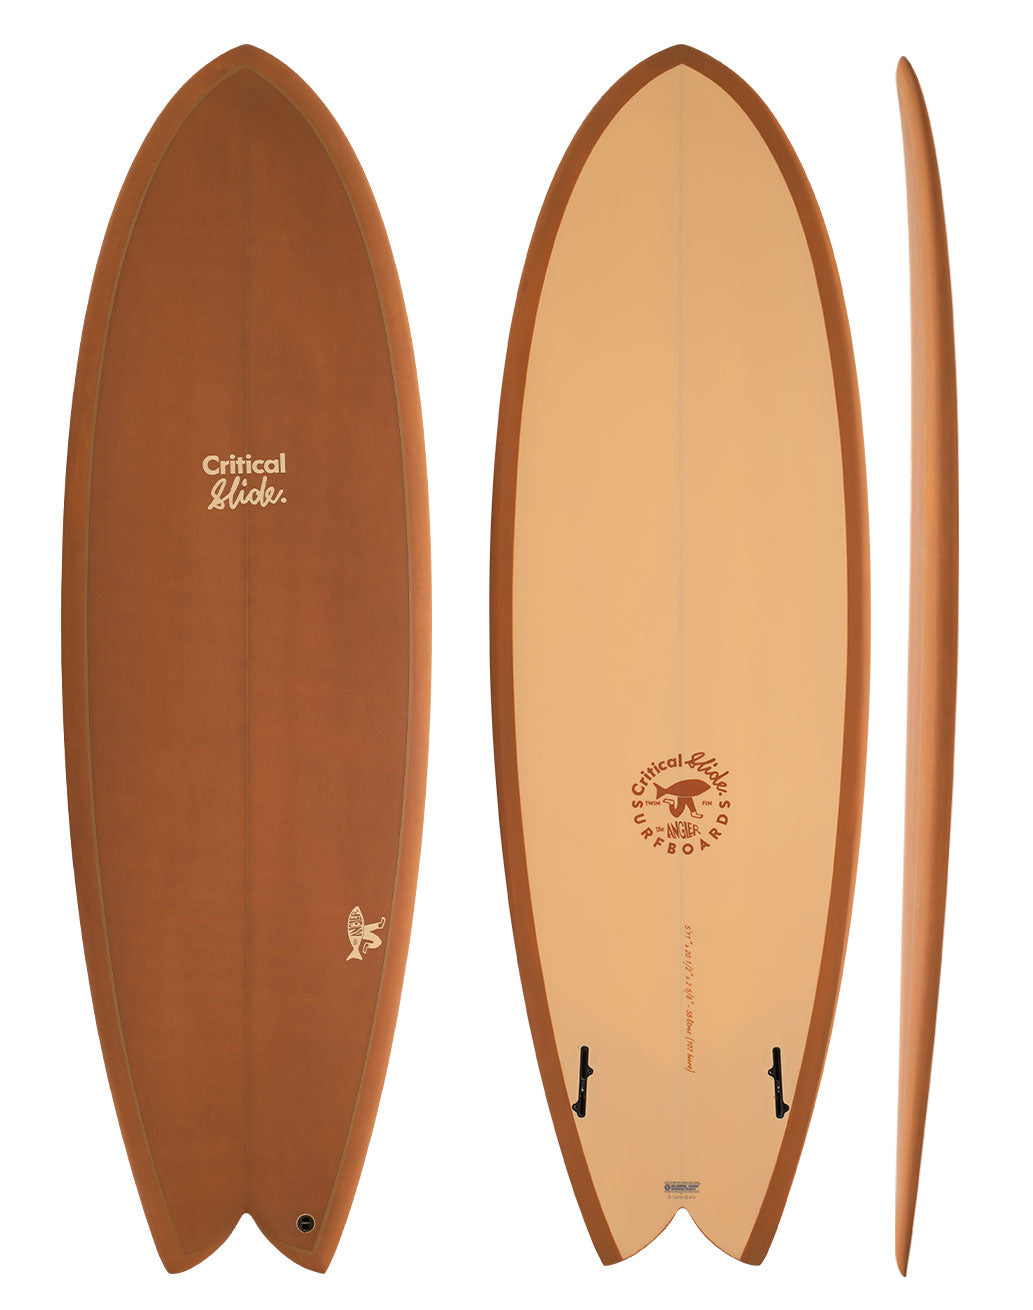 The Critical Slide Society Surfboards - The Angler - ochre coloured twin fin surfboard